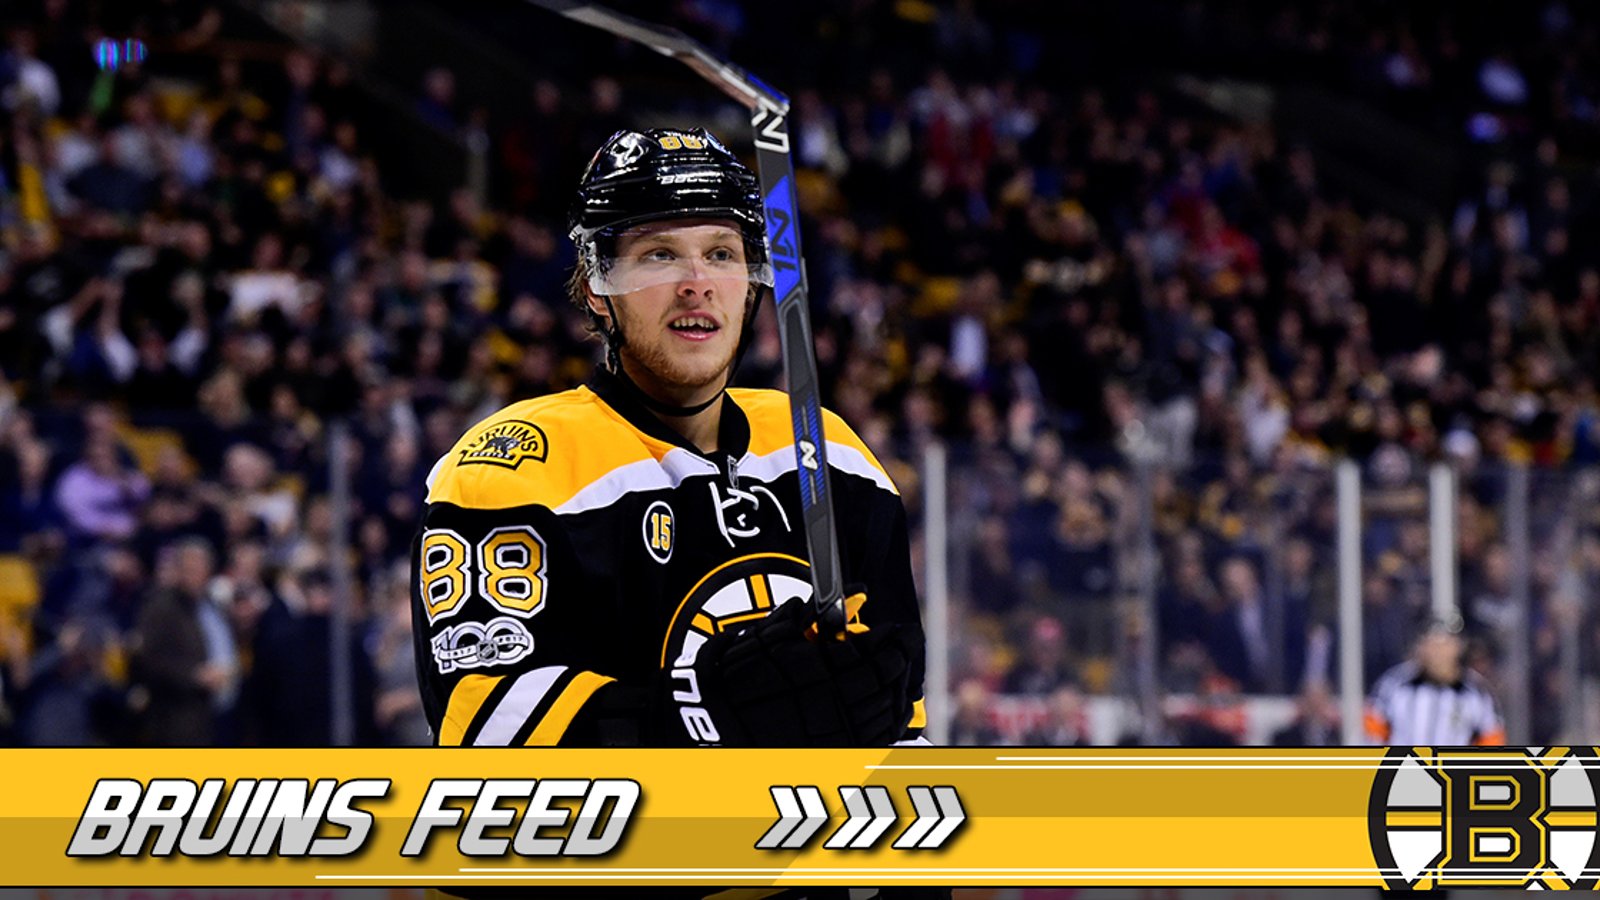 INSIGHT: How much should the Bruins pay Pastrnak?